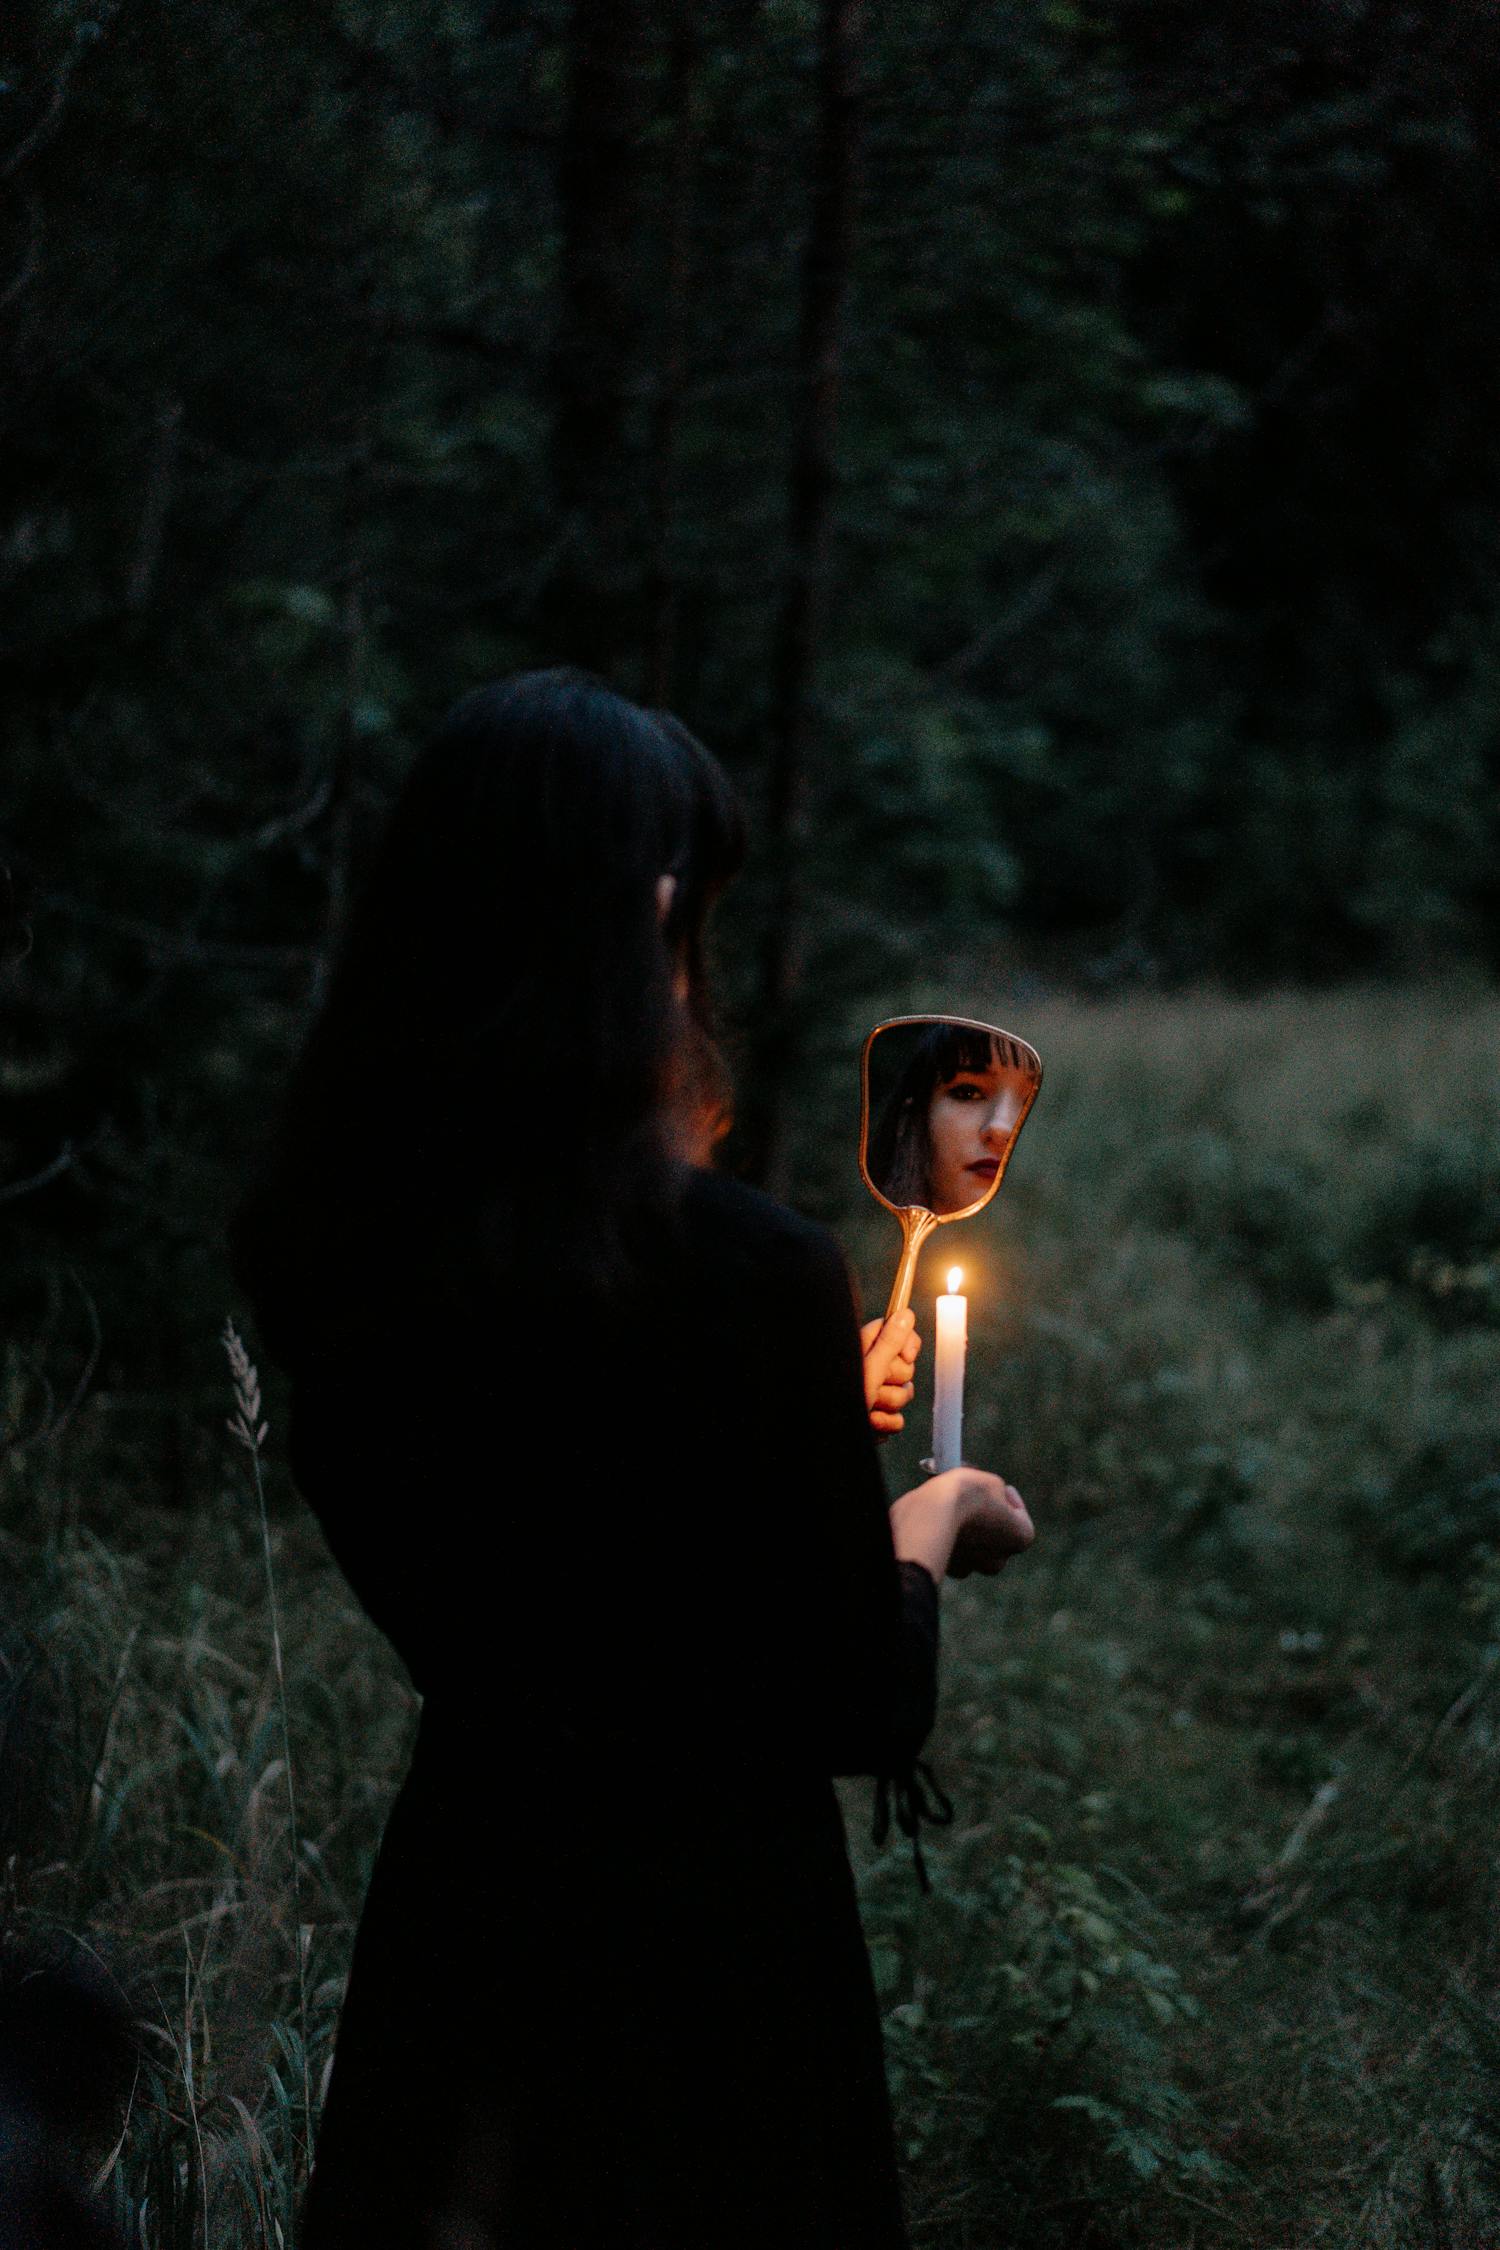 Woman in Black Long Sleeve Shirt Holding Lighted Candle · Free Stock Photo